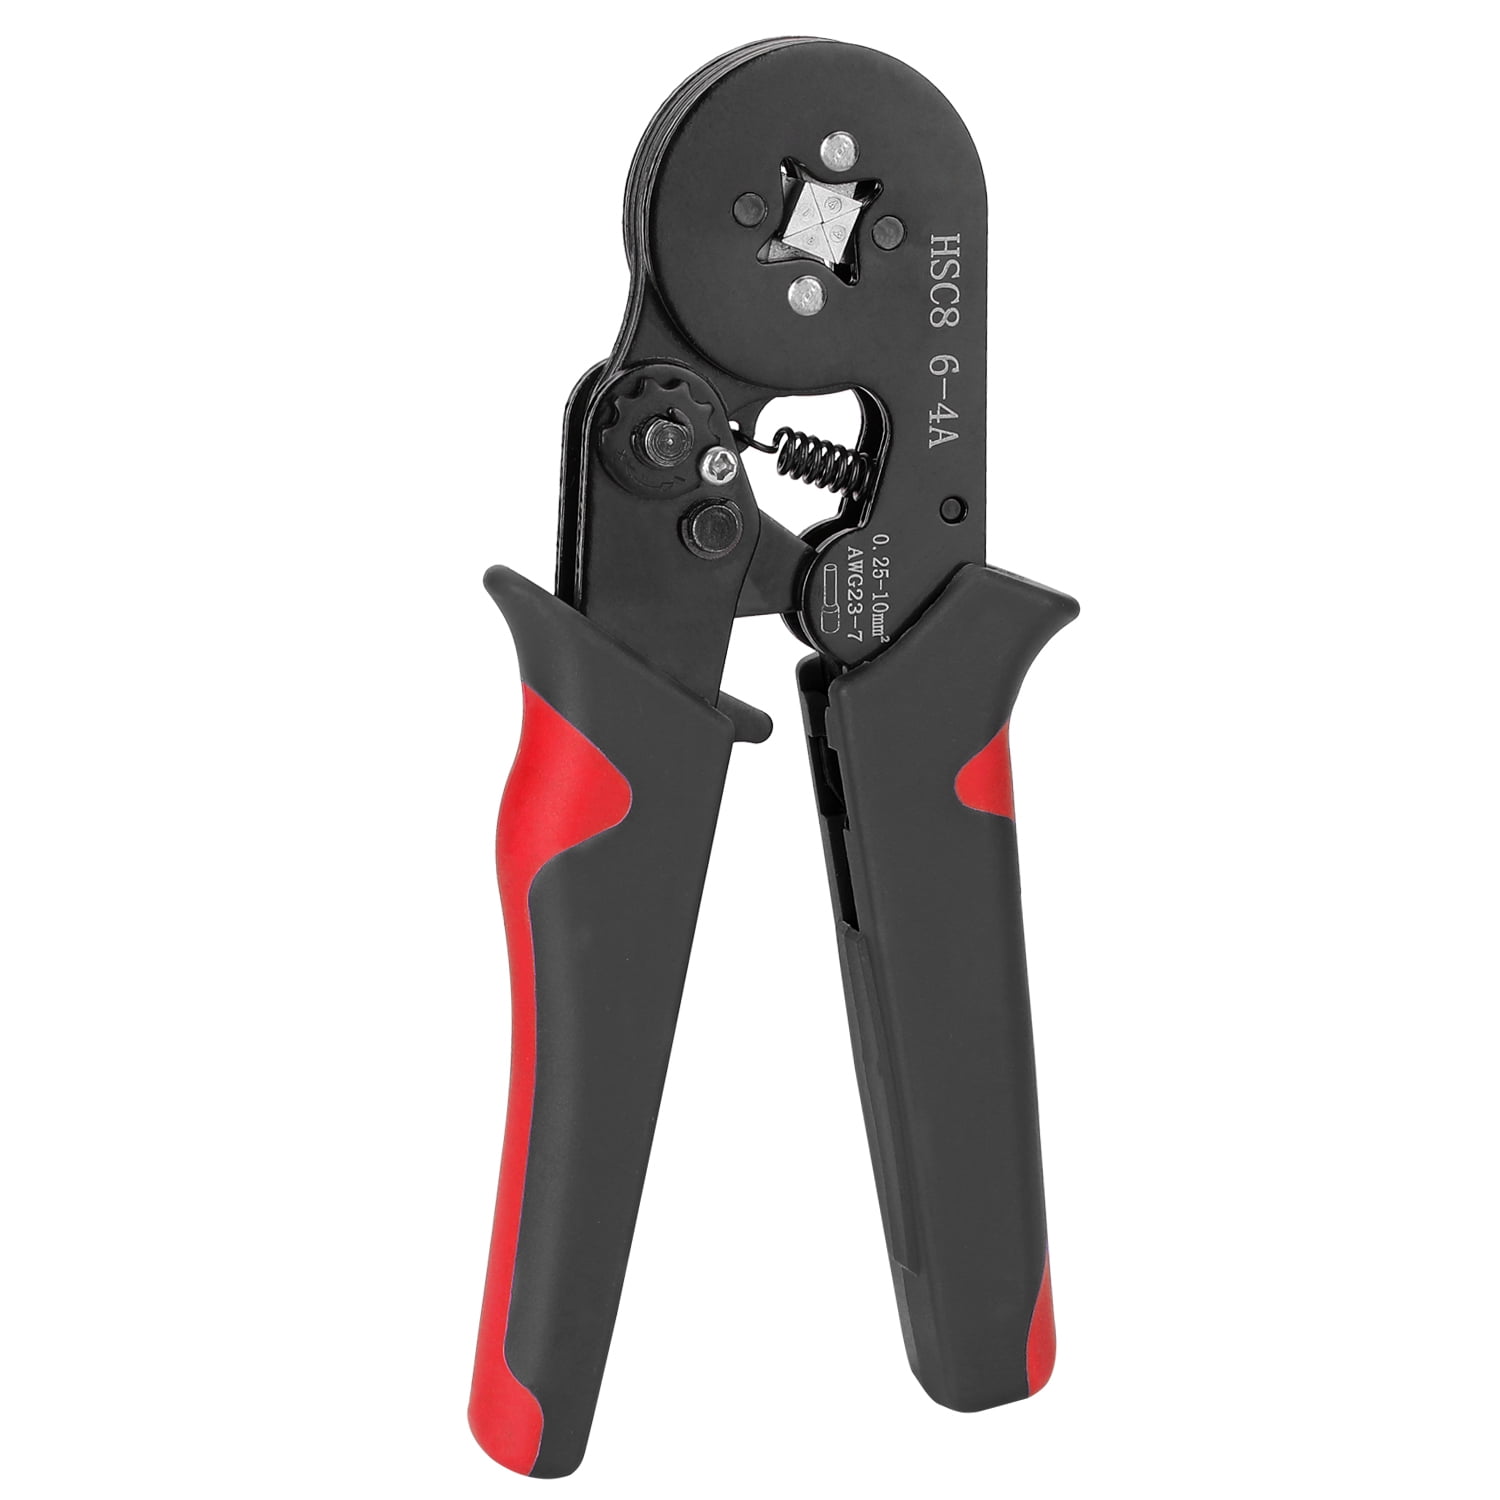 Crimping Plier End Sleeve Pressing Hard Small Wires Terminals Cutting Hand Tool 